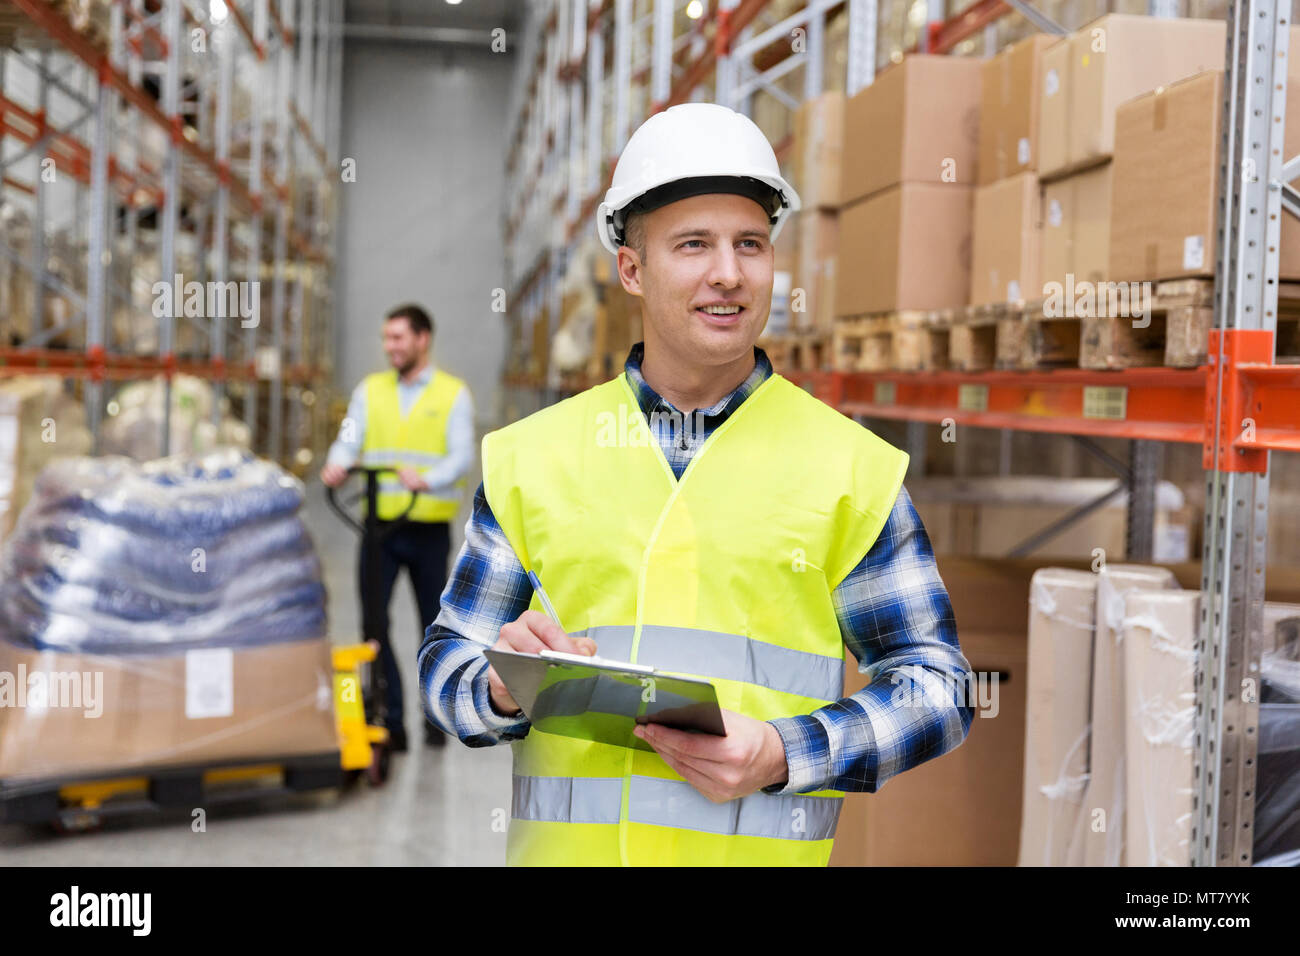 warehouse worker with clipboard in safety vest Stock Photo